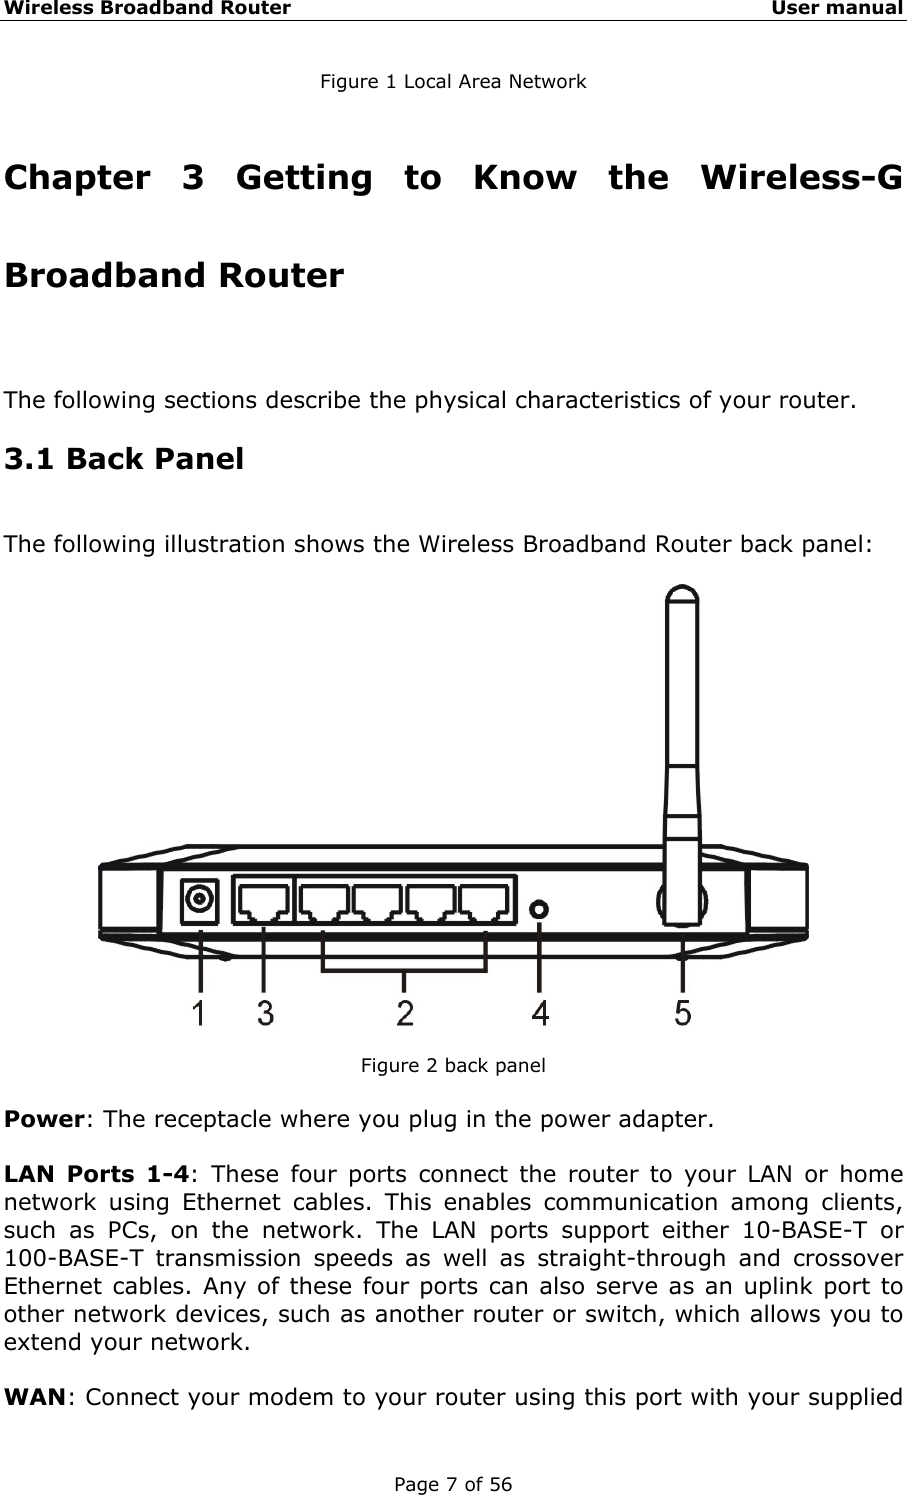 Wireless Broadband Router                                                   User manual Page 7 of 56 Figure 1 Local Area Network  Chapter 3 Getting to Know the Wireless-G Broadband Router The following sections describe the physical characteristics of your router. 3.1 Back Panel The following illustration shows the Wireless Broadband Router back panel:    Figure 2 back panel  Power: The receptacle where you plug in the power adapter.  LAN Ports 1-4: These four ports connect the router to your LAN or home network using Ethernet cables. This enables communication among clients, such as PCs, on the network. The LAN ports support either 10-BASE-T or 100-BASE-T transmission speeds as well as straight-through and crossover Ethernet cables. Any of these four ports can also serve as an uplink port to other network devices, such as another router or switch, which allows you to extend your network.  WAN: Connect your modem to your router using this port with your supplied 